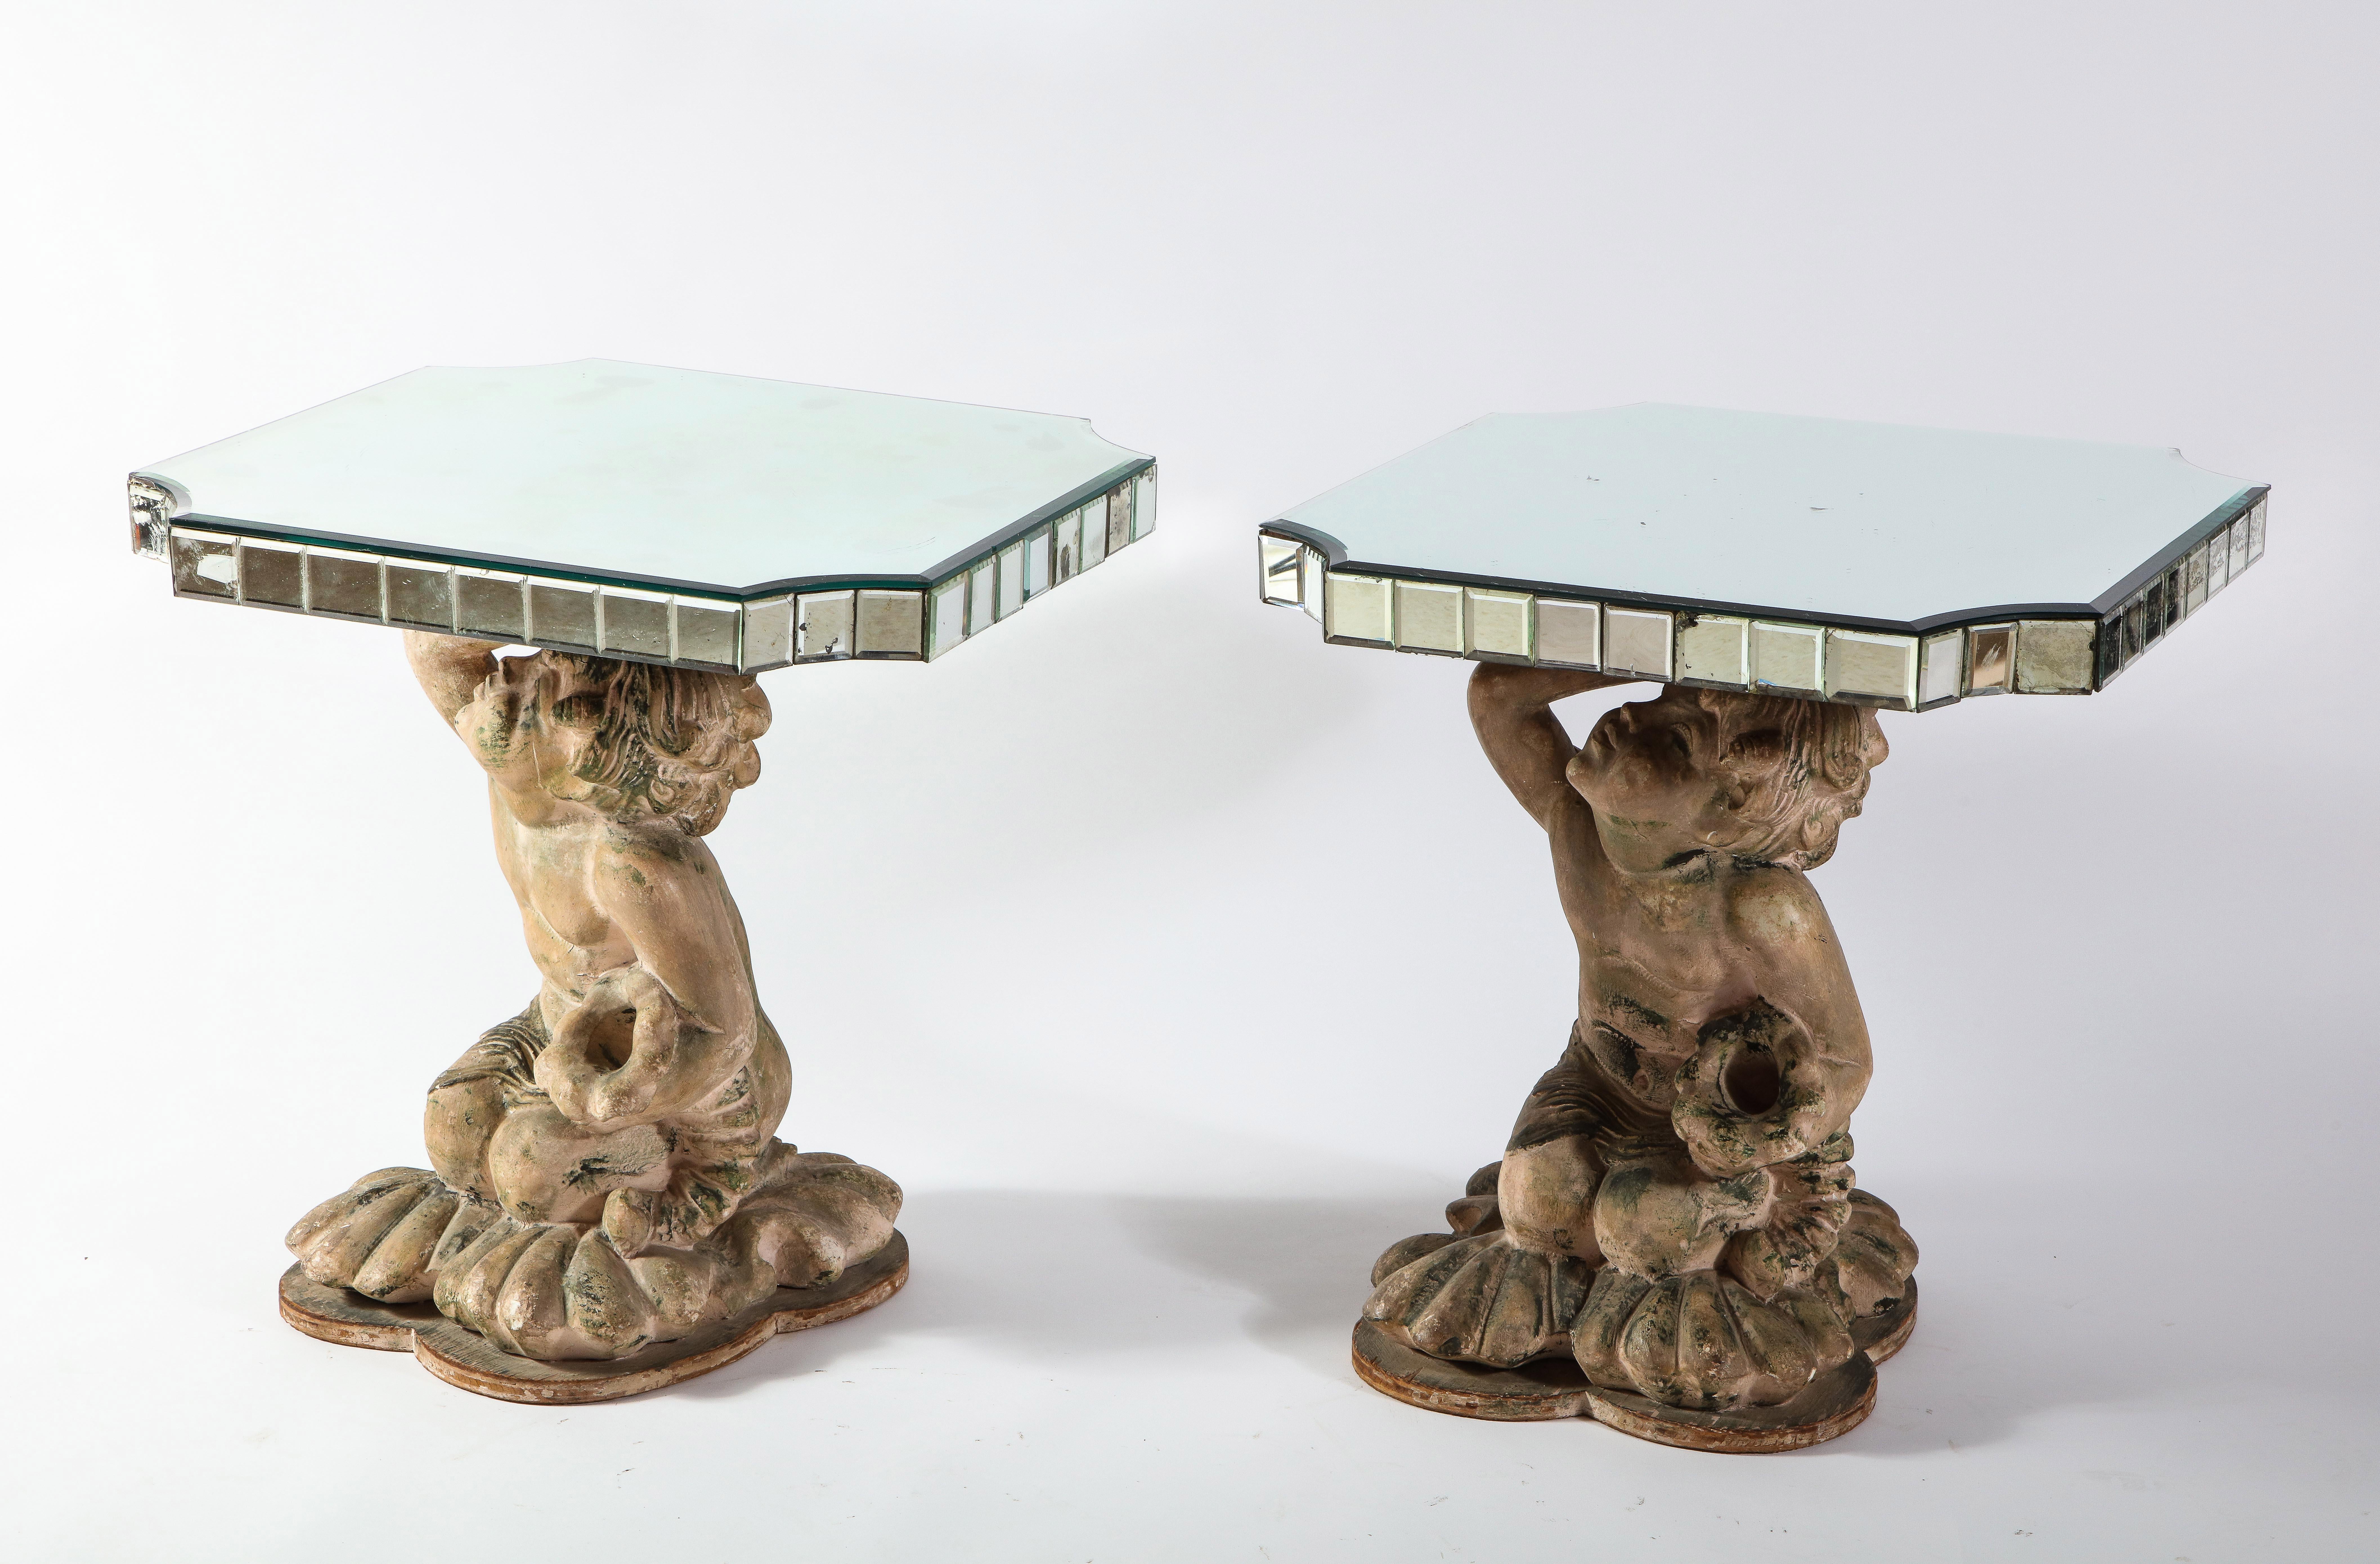 Hand-Carved Pair of Midcentury French Terracotta Mirrored and Figural Side Tables For Sale